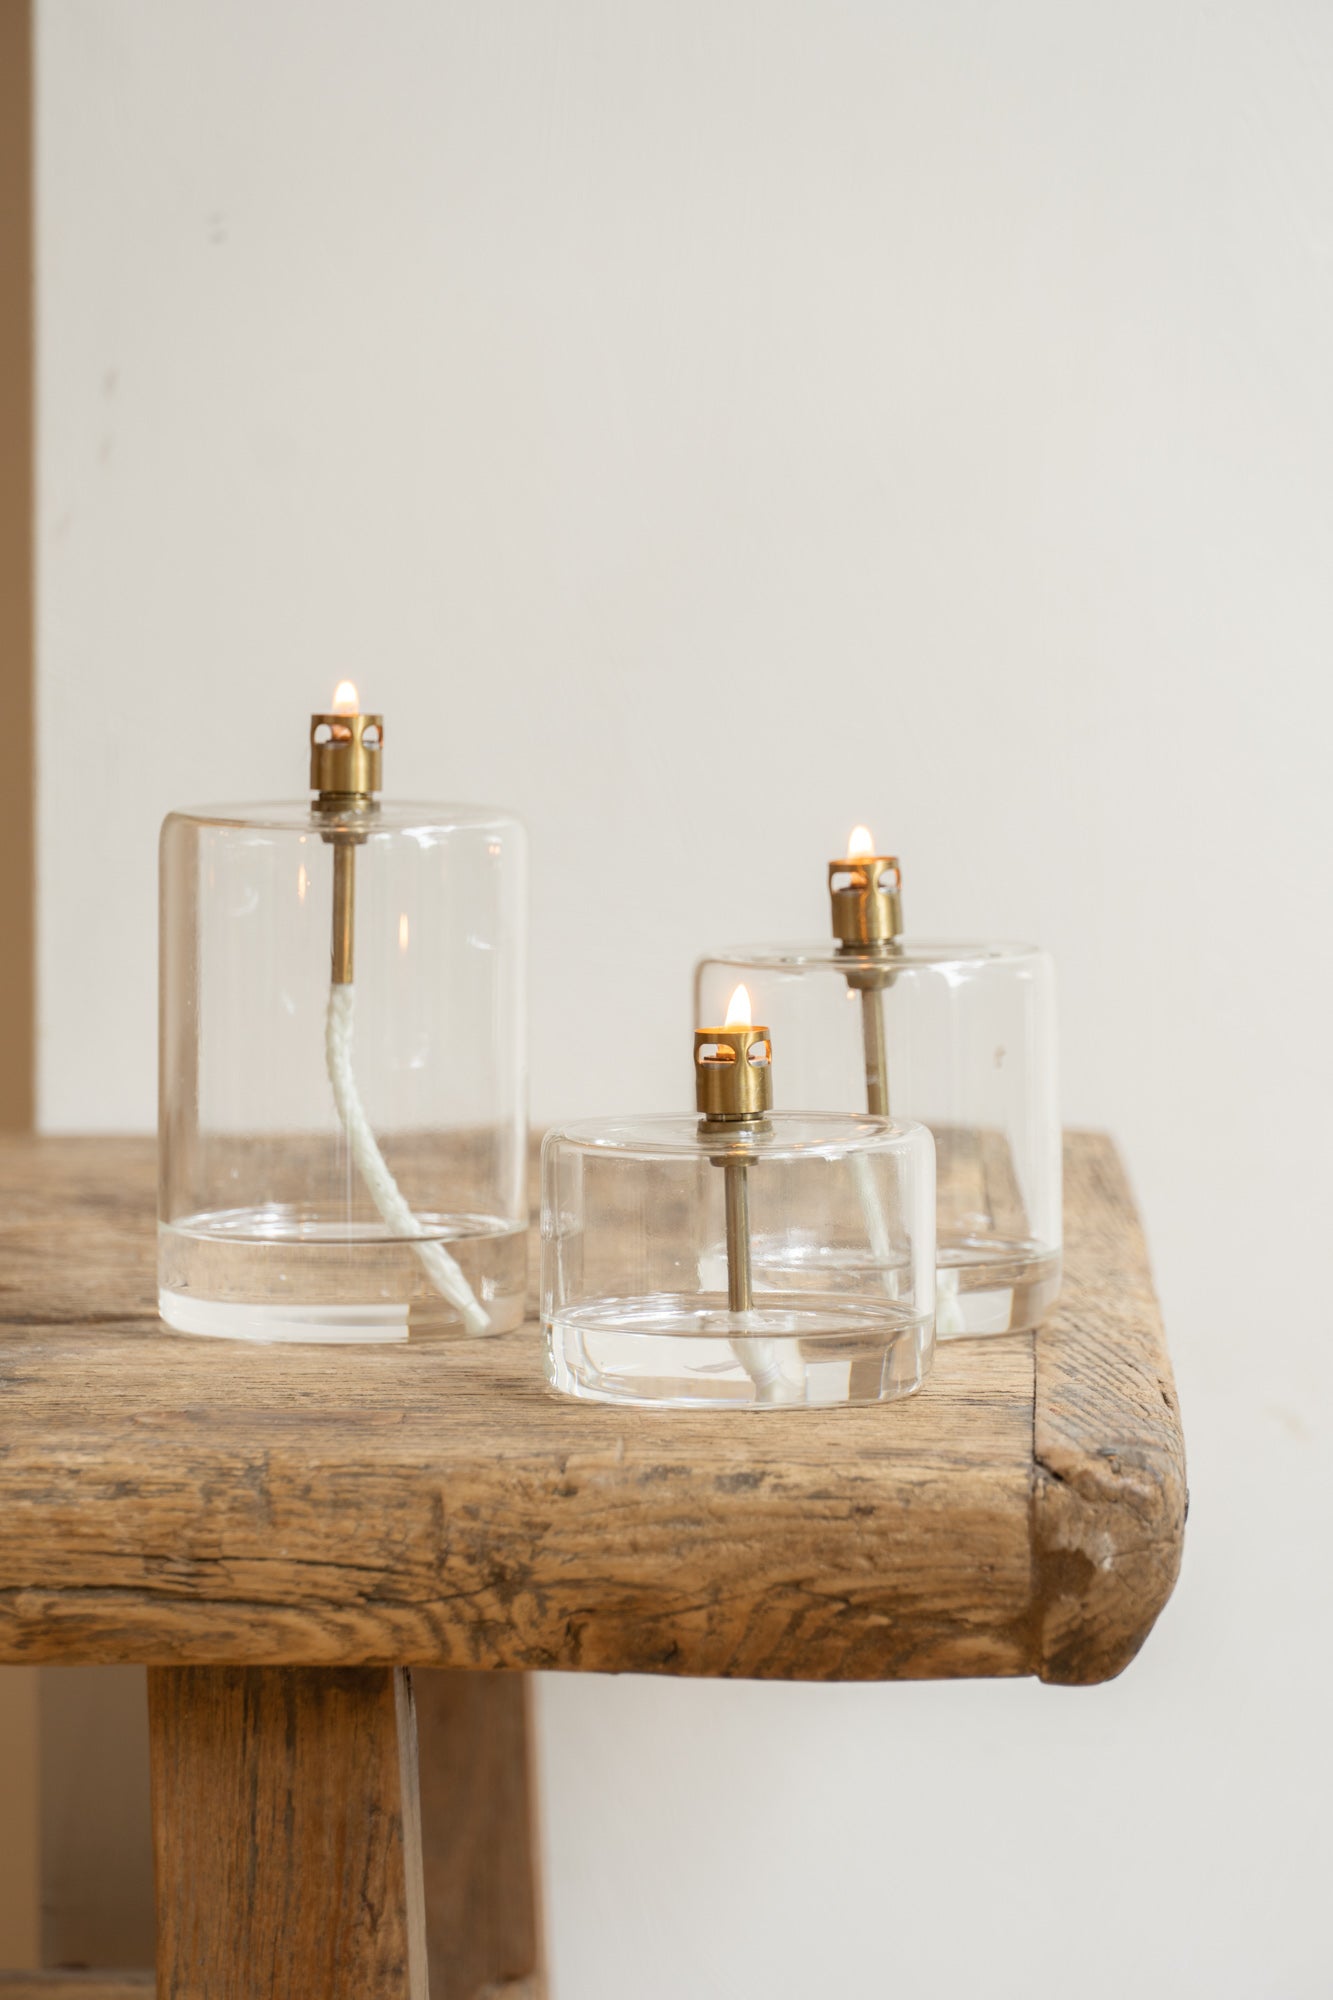 Cyl Oil Lamp by The Loft Selects.